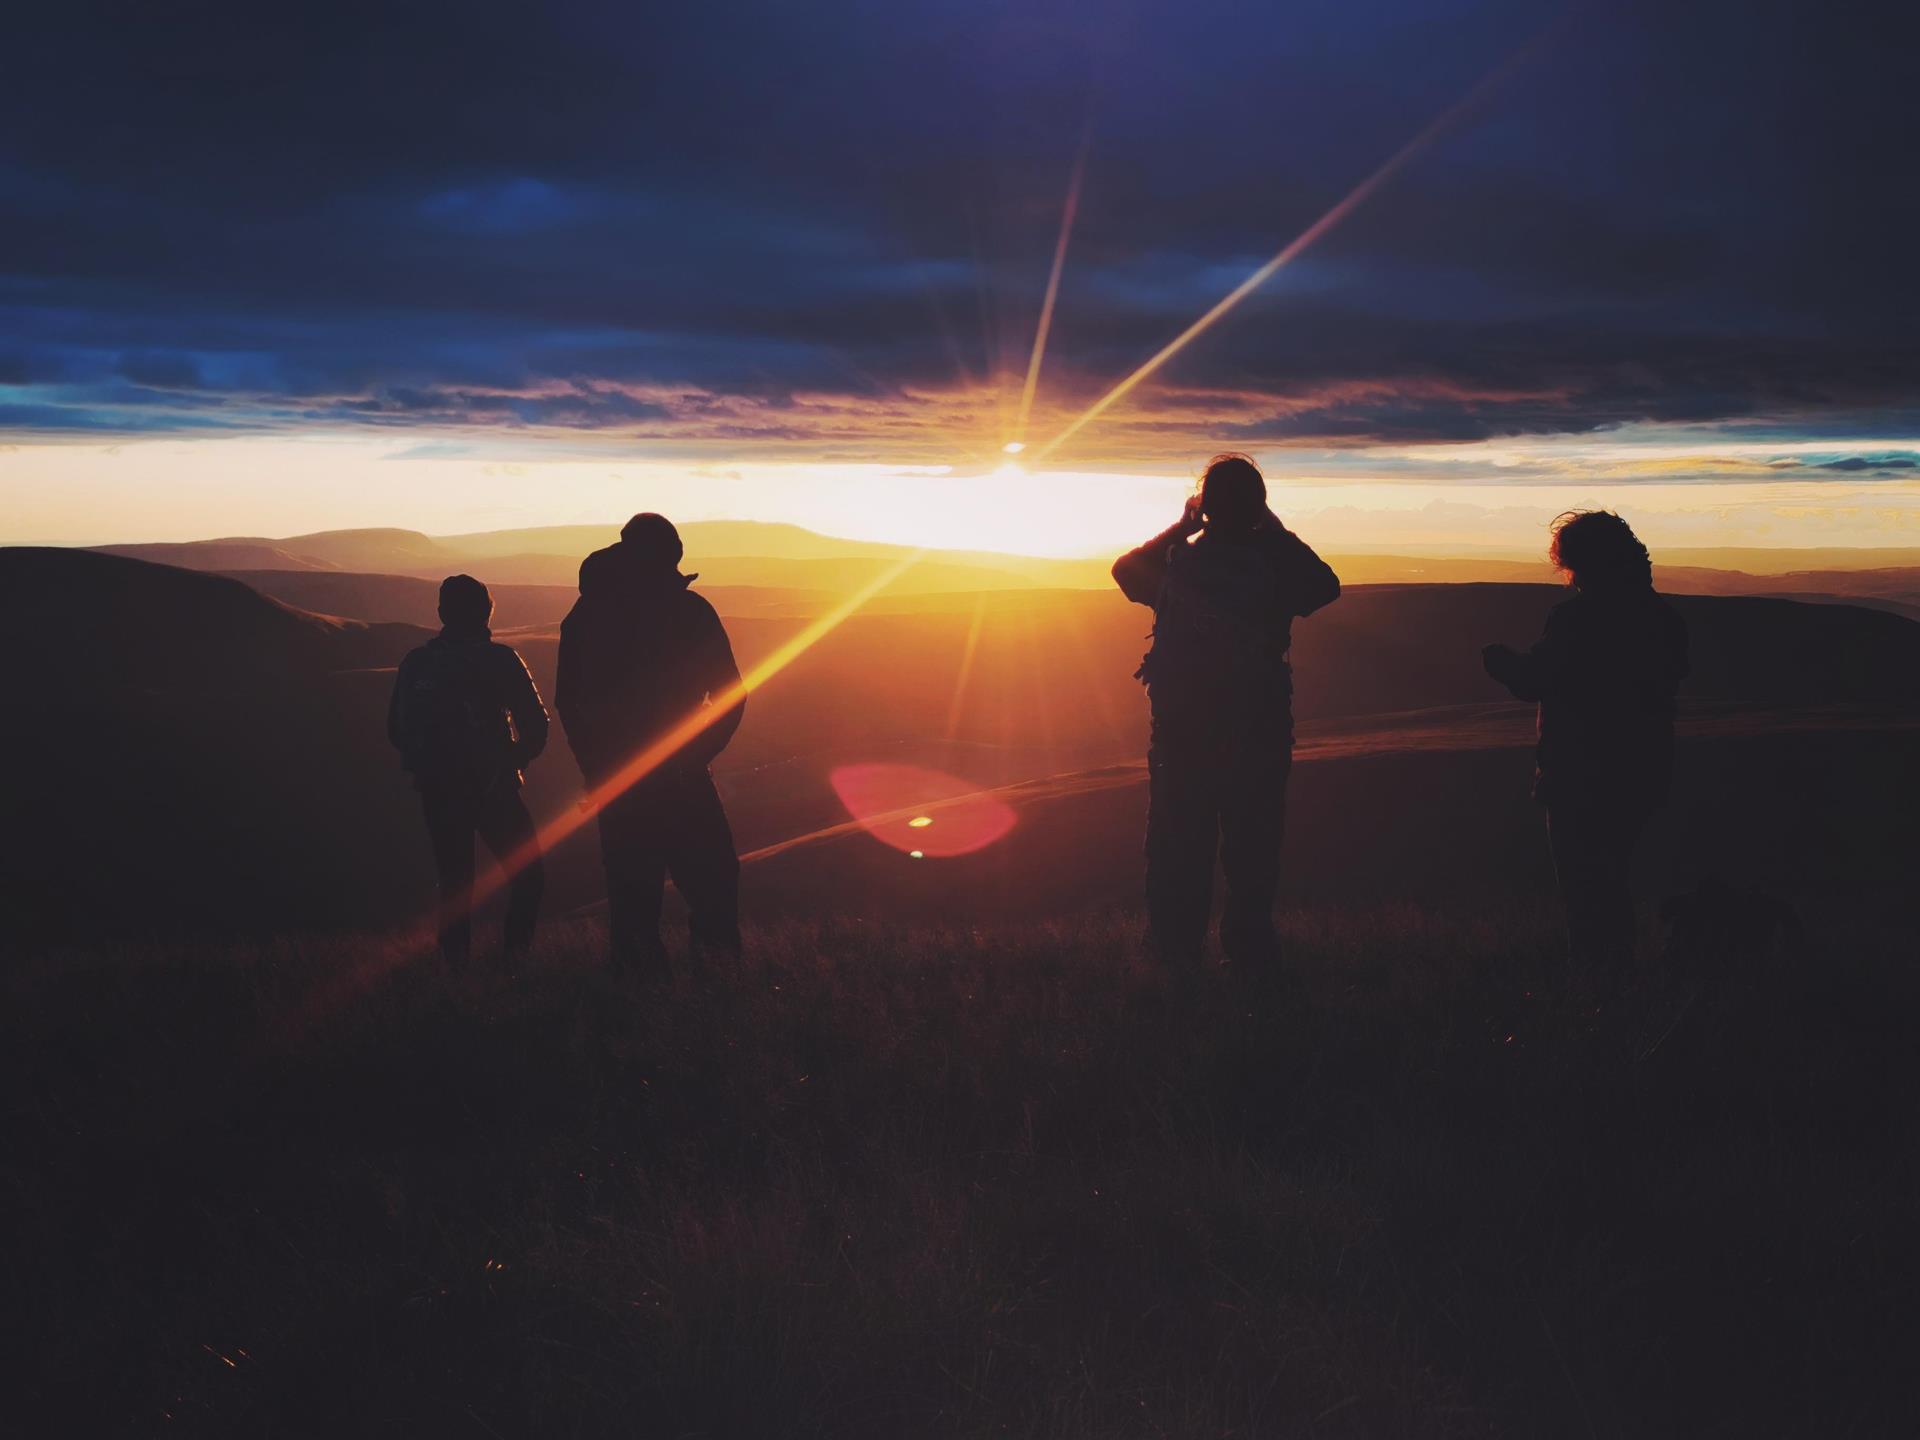 Watching sunset over the Brecon Beacons